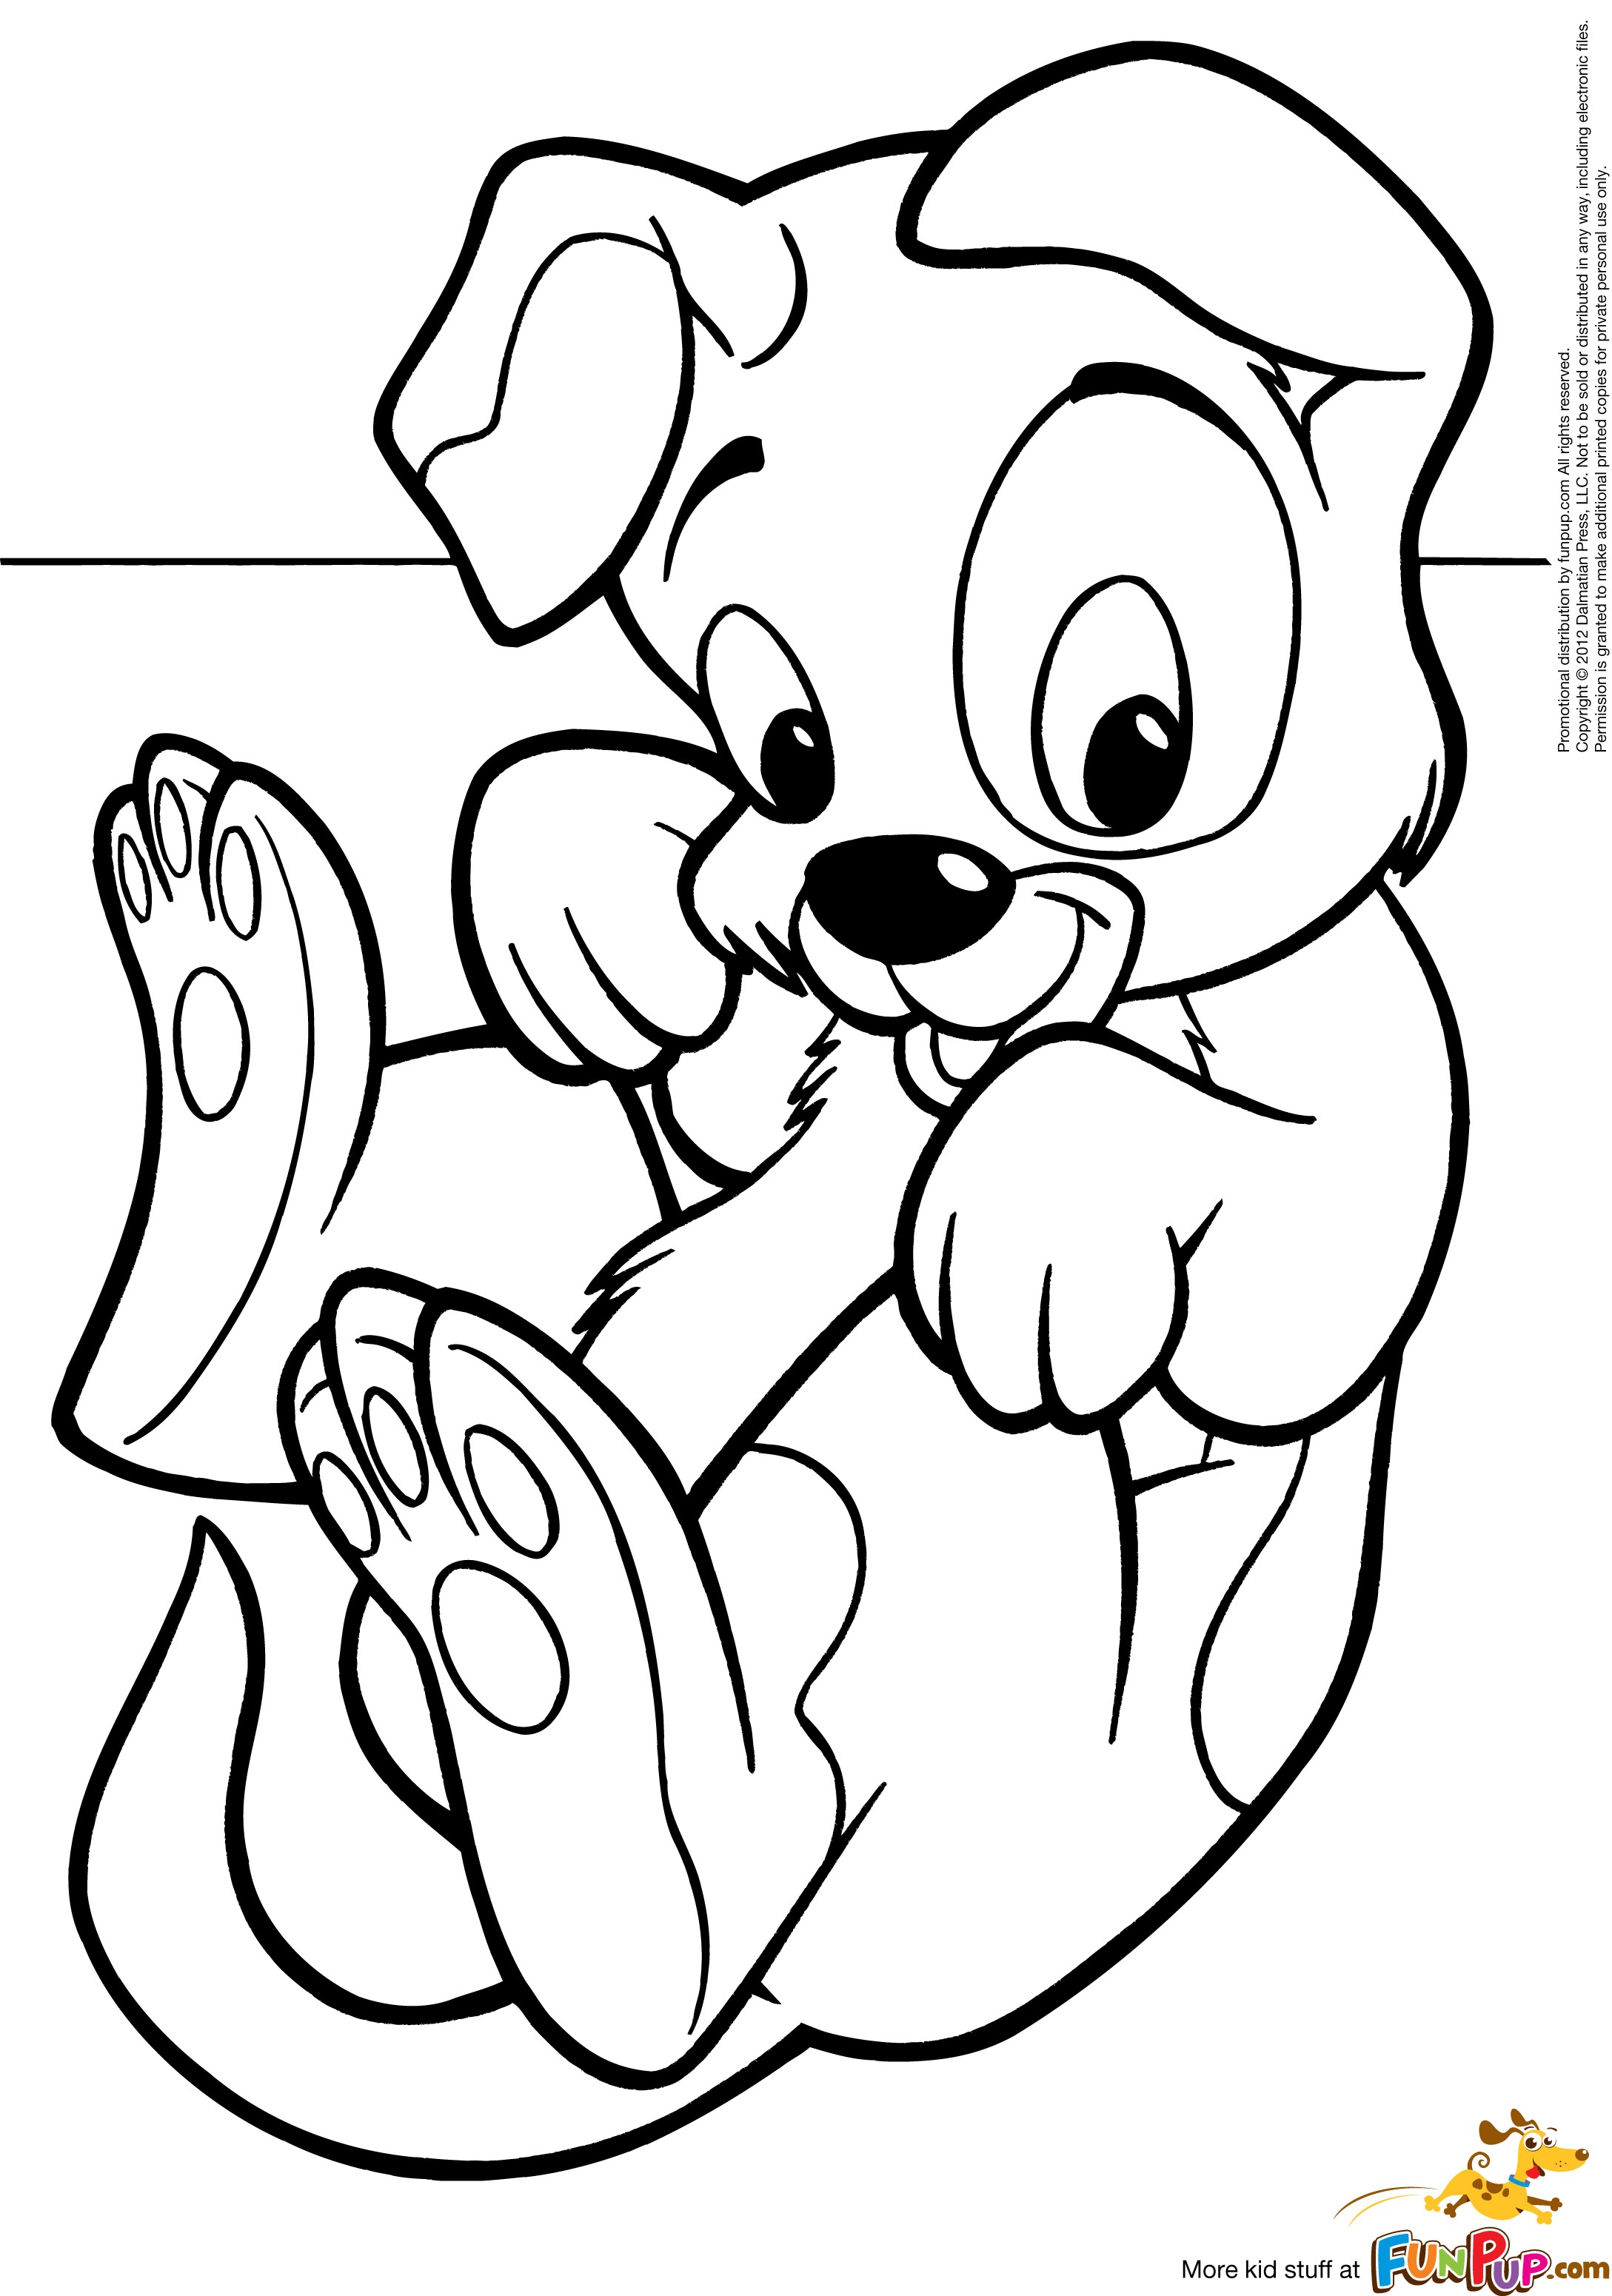 1000+ images about Coloring Pages